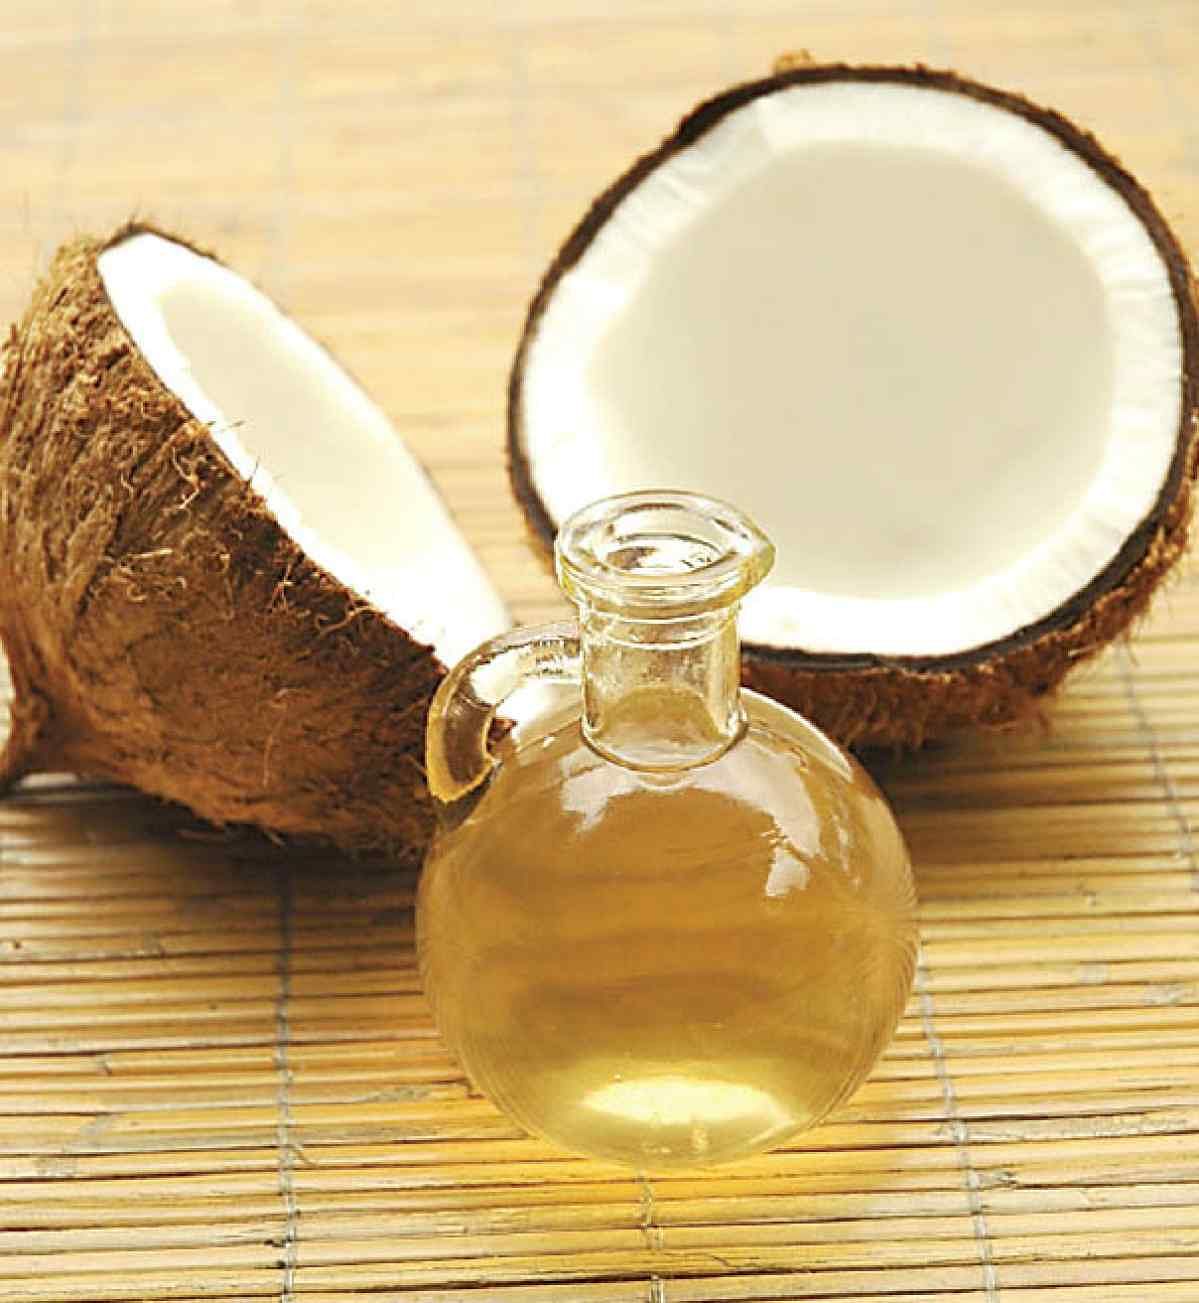 Is coconut oil poison as claimed by a Harvard professor? Not quite says research.